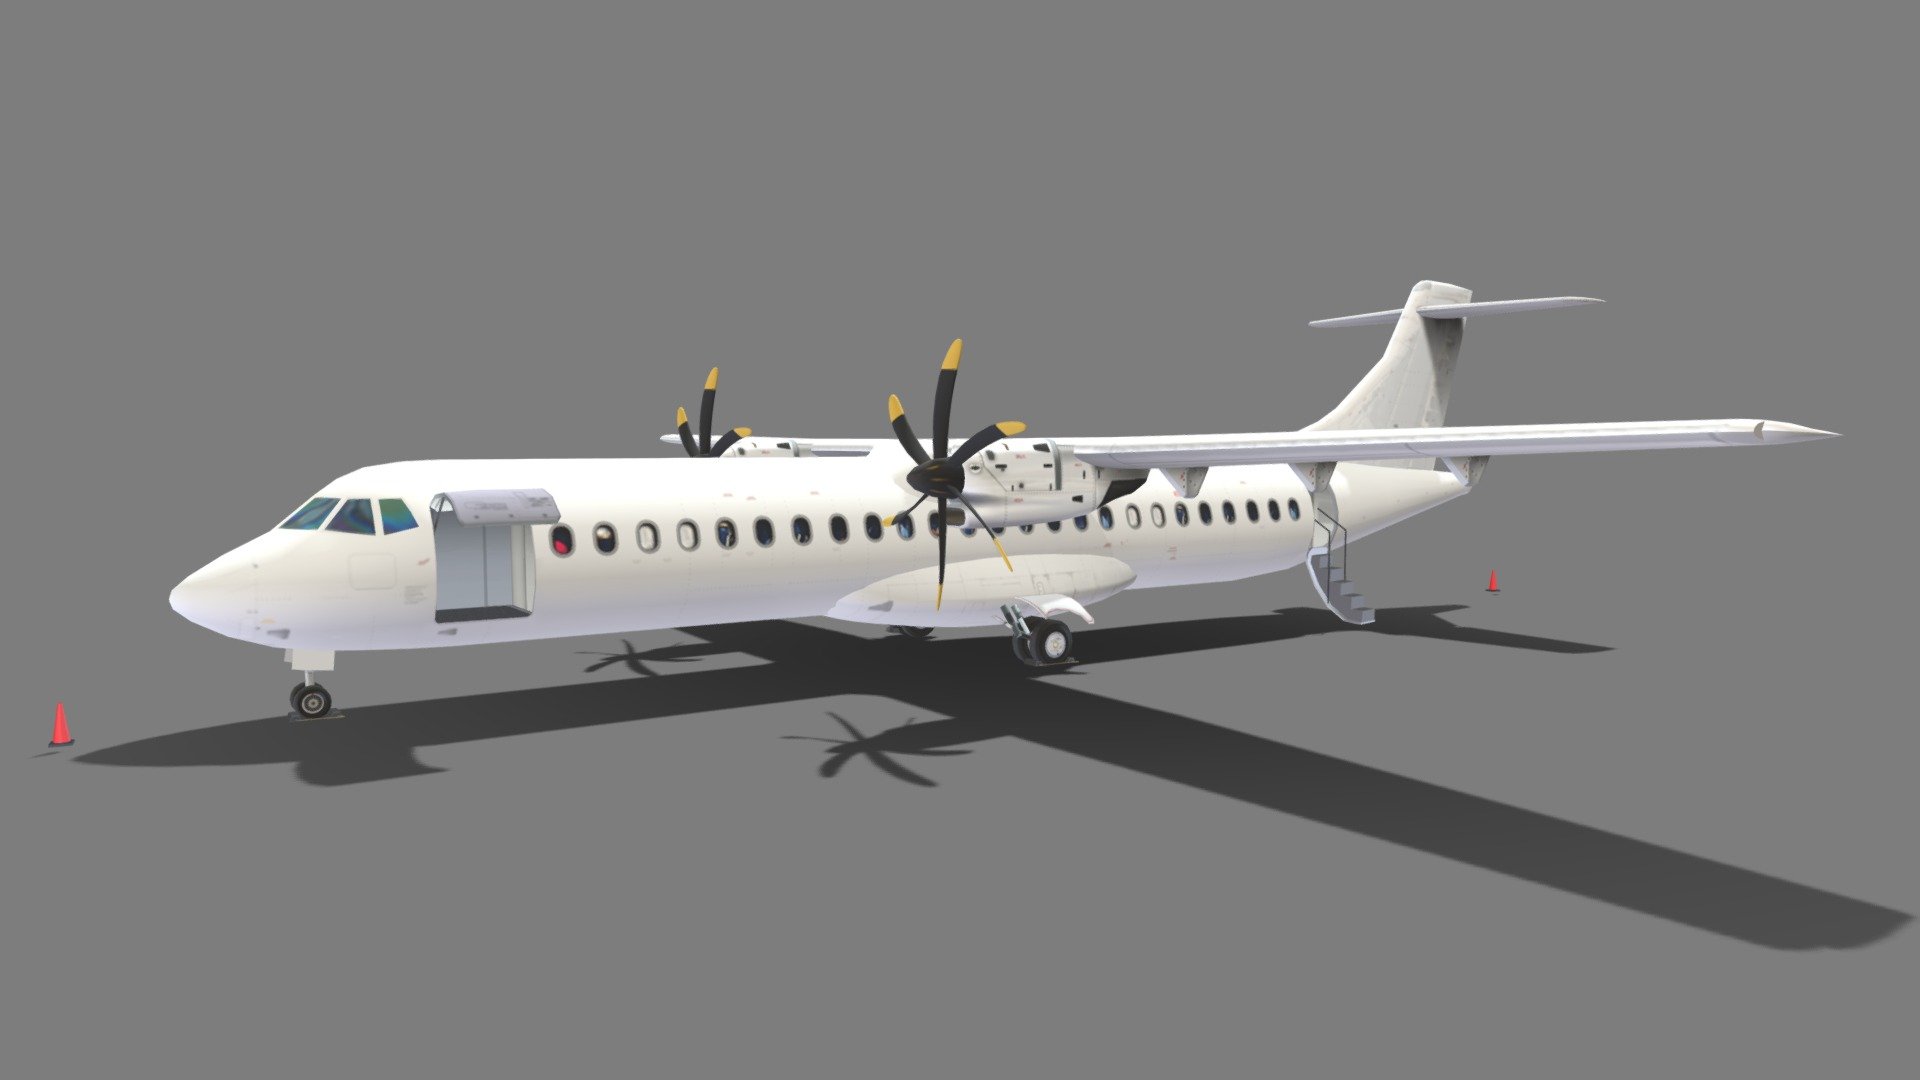 During the 1980s, French aerospace company Aérospatiale and Italian aviation conglomerate Aeritalia merged their work on a new generation of regional aircraft. The ATR 72 was developed as a stretched variant of the ATR 42. On 27 October 1989.

Optimized for minimal complexity with less than 5000 polygons. Despite its low polygon count, the model accurately captures the iconic design features, making it ideal for real-time rendering in games or simulations.

ThIs model comes with a blank layered texture, providing a clean slate for customization. This allows you to apply your own color schemes, or decals. 

this is a static, non rigged, non animated, Lowpoly mesh, 2048 psd template layered texture, for MSFS or XPlane Scenery Airport development , standard materials, enough detailed just to be seen as part of an scene without consuming GPU resources. open doors and closed doors model included

thanks for looking! dont forget to check my other models - ATR 72 600 static Lowpoly Blank - Buy Royalty Free 3D model by Hangarcerouno 3d model